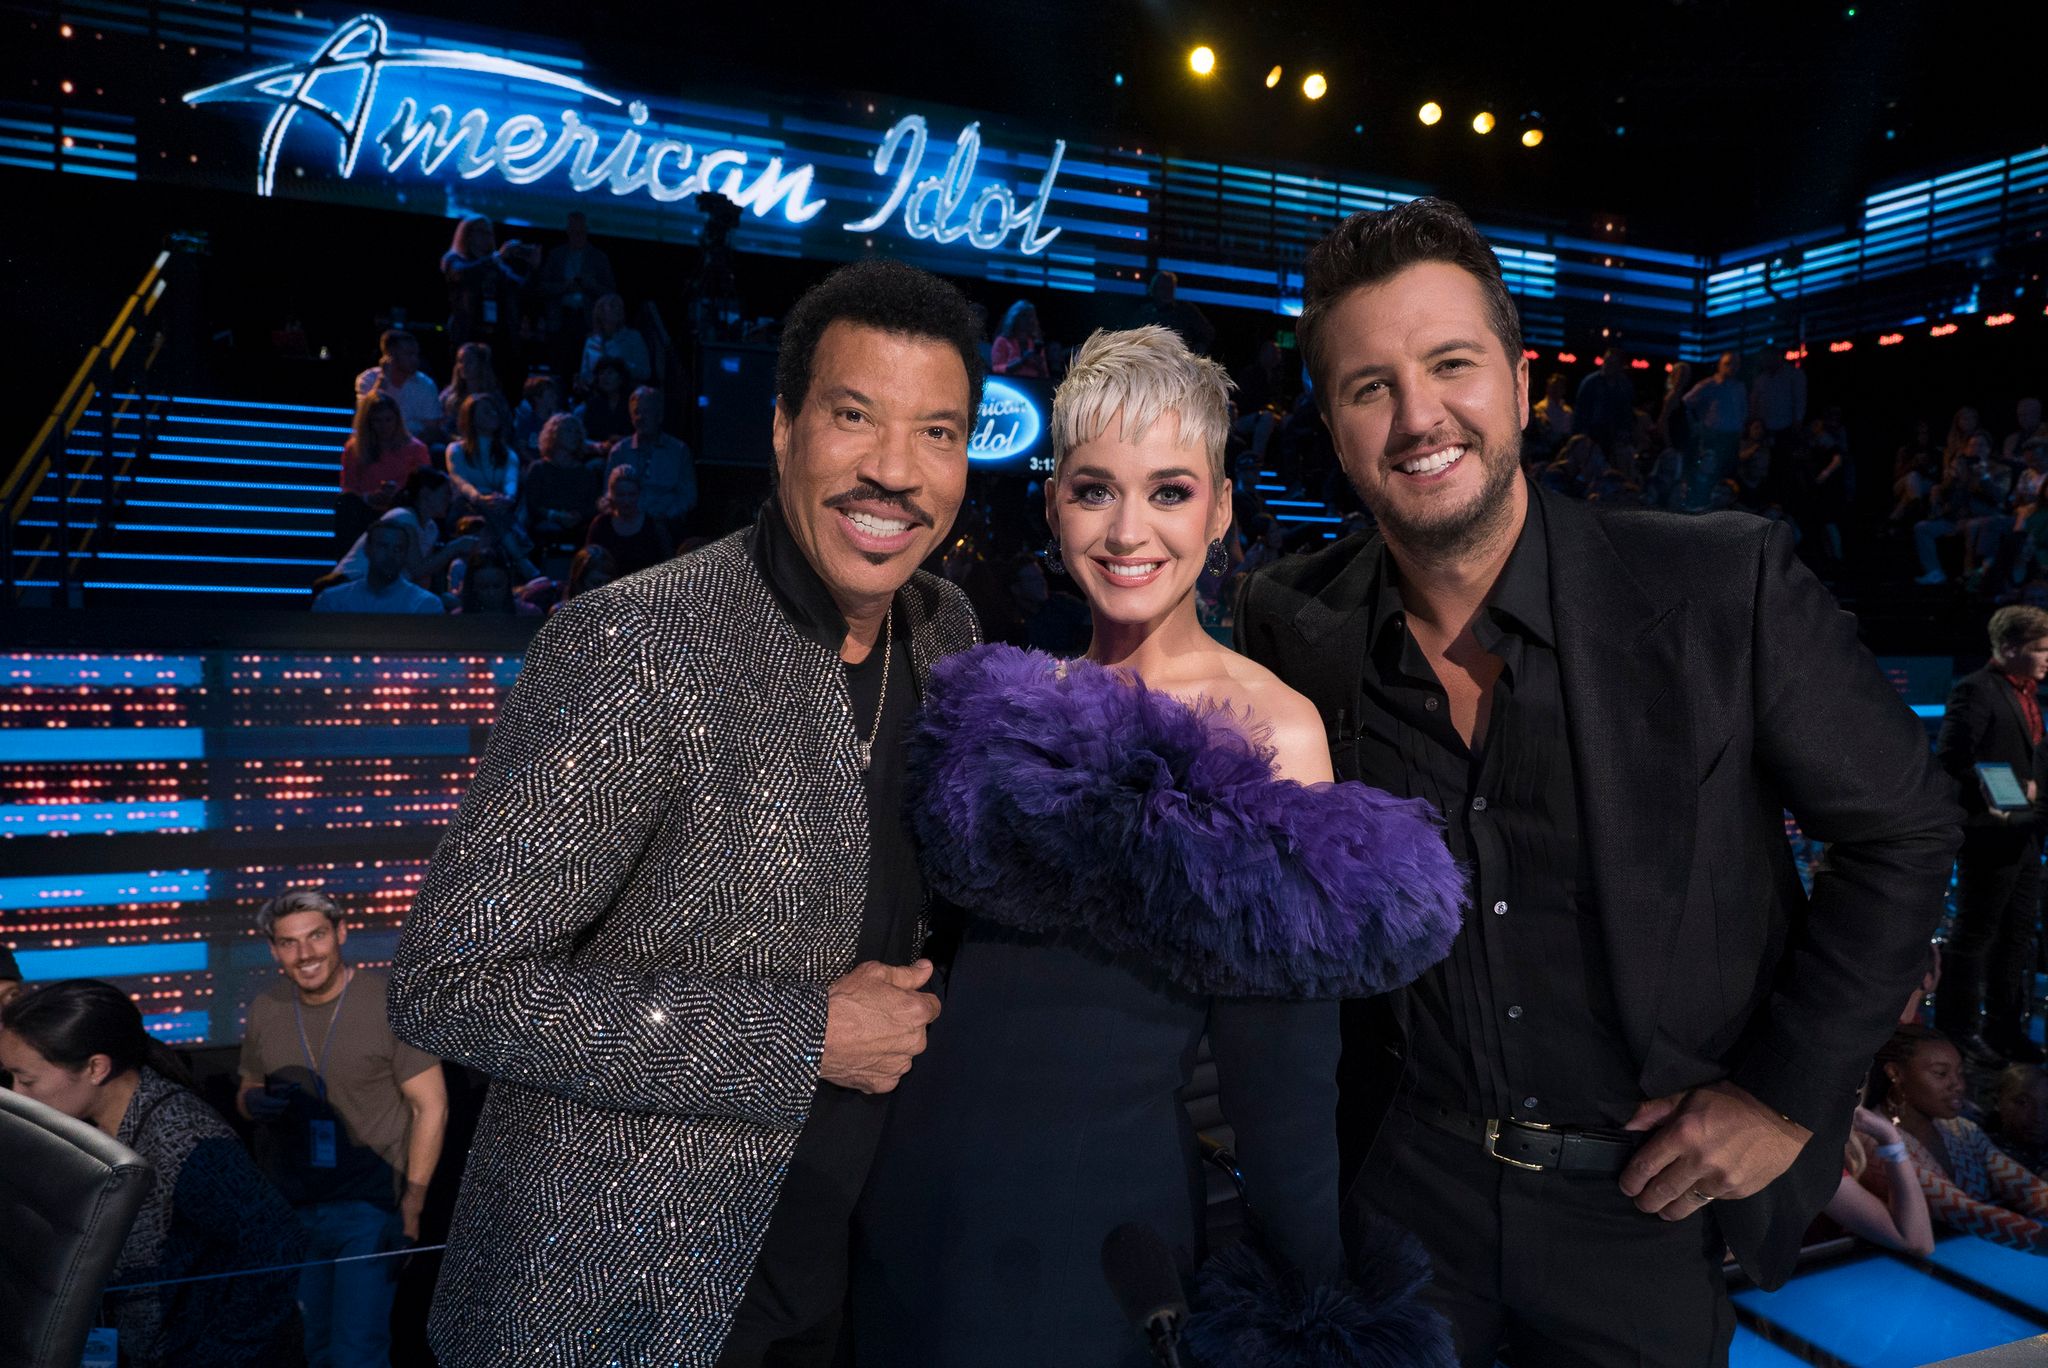 American Idol Judges Lionel Richie, Katy Perry and Luke Bryan| Photo: Getty Images